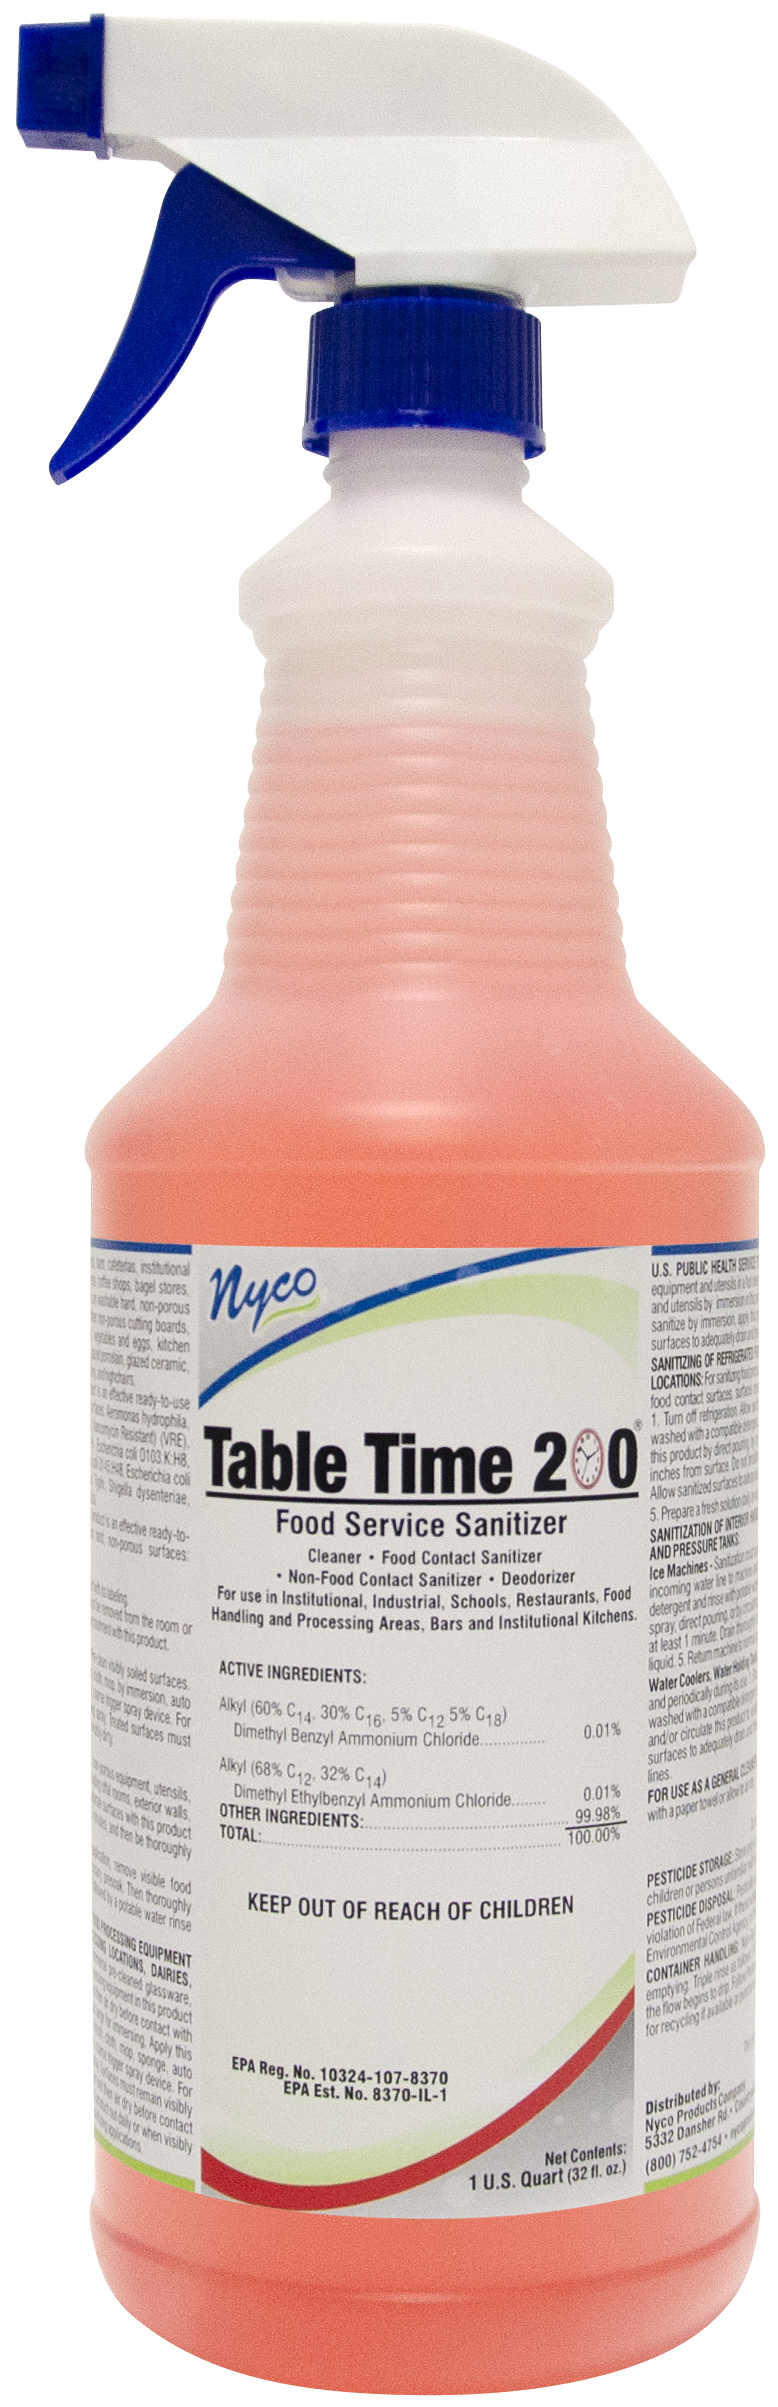 Table Time 200® Food Service Sanitizer Kills 99.999% of Germs